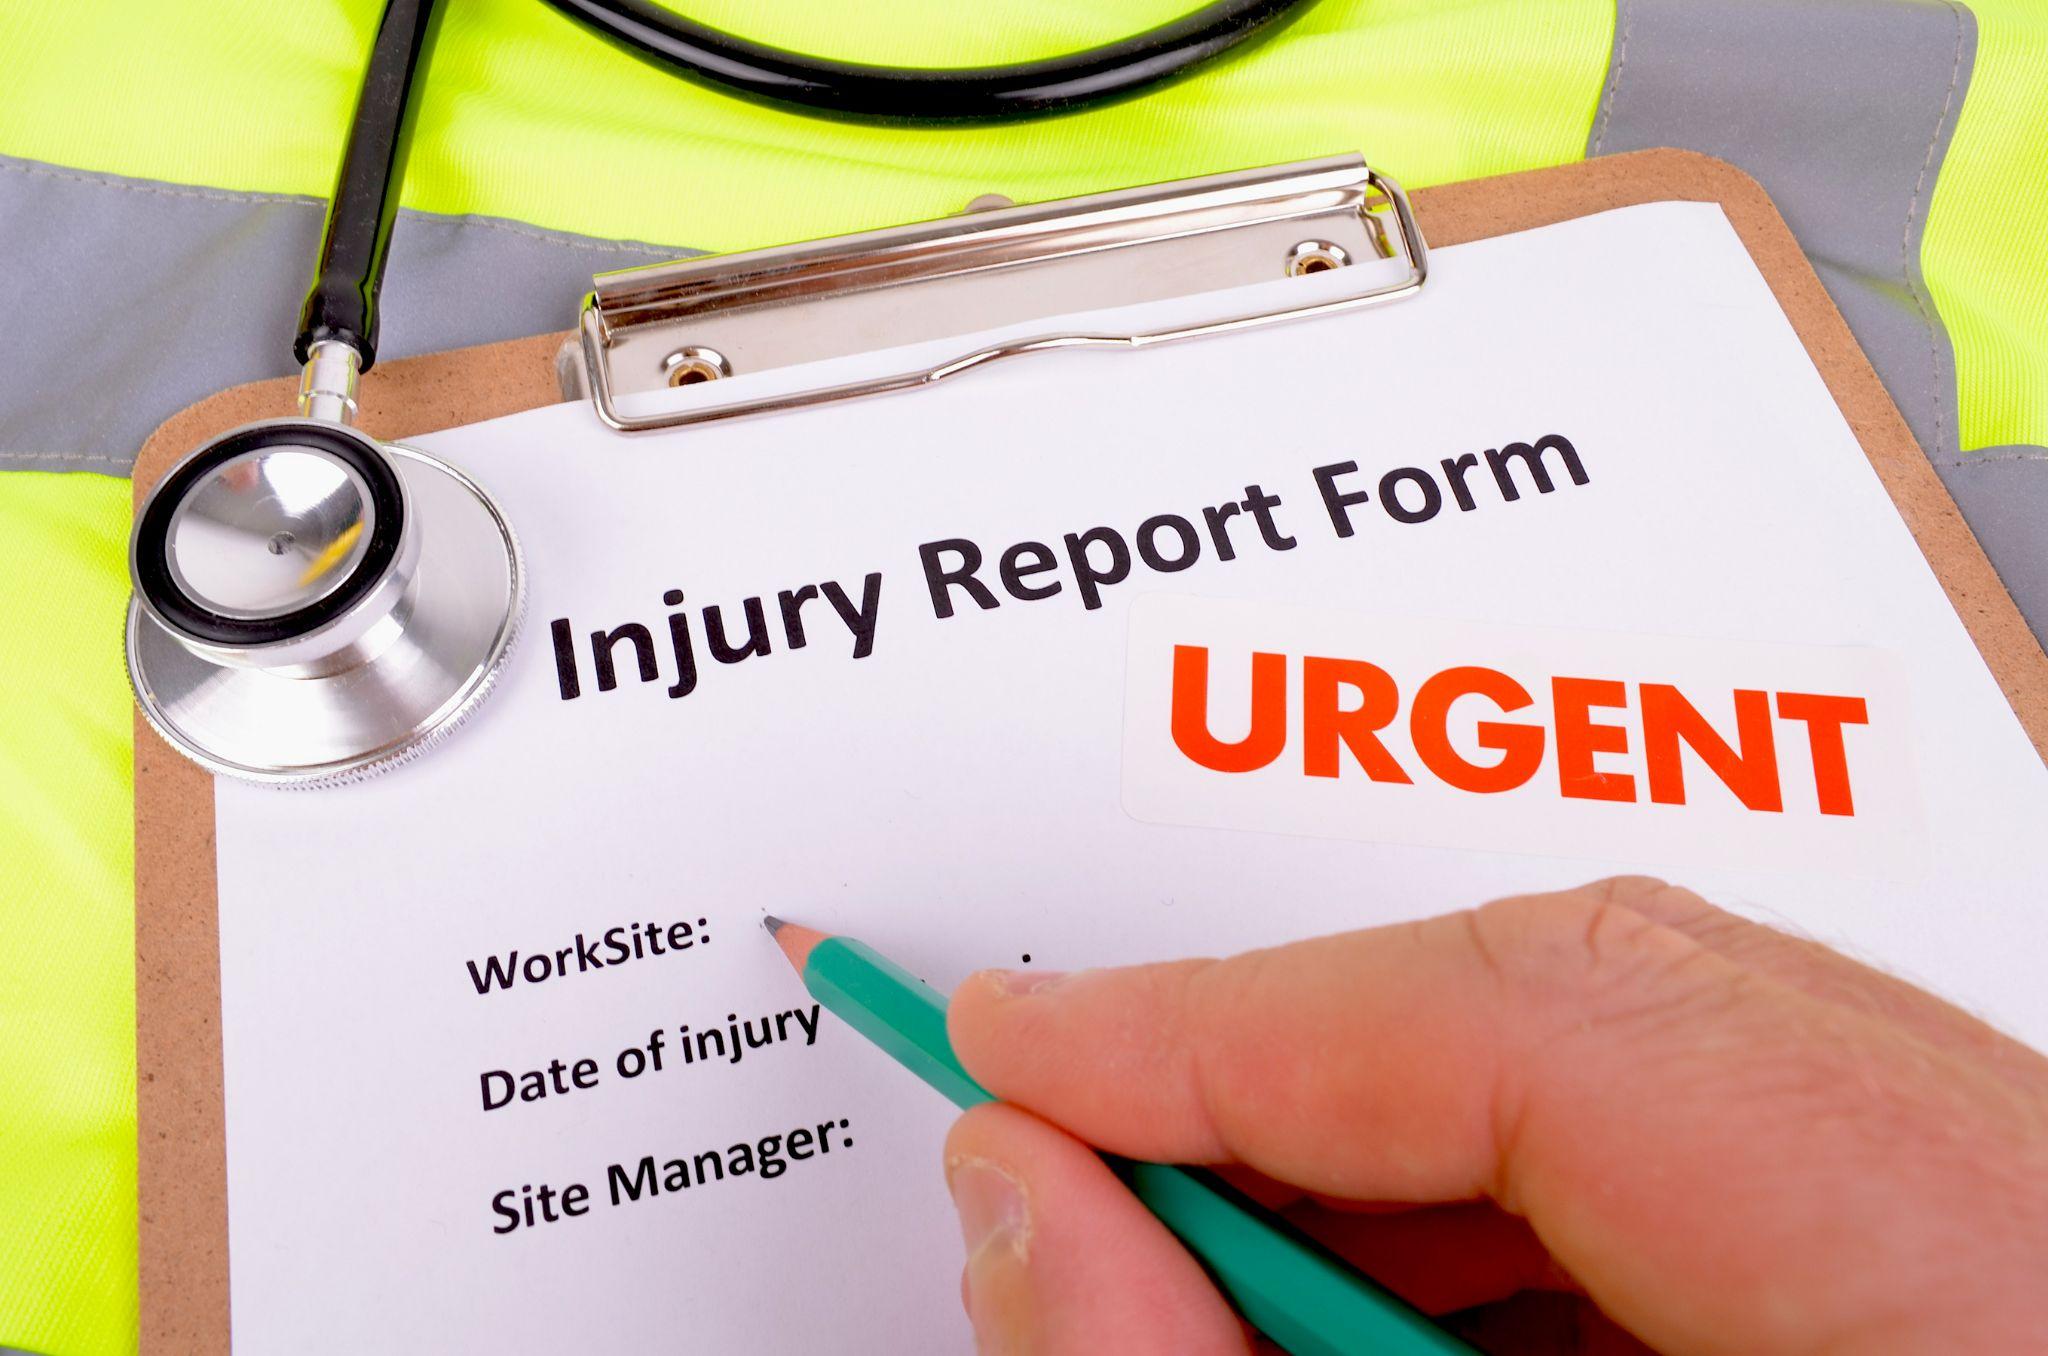 Work place injury report form and document